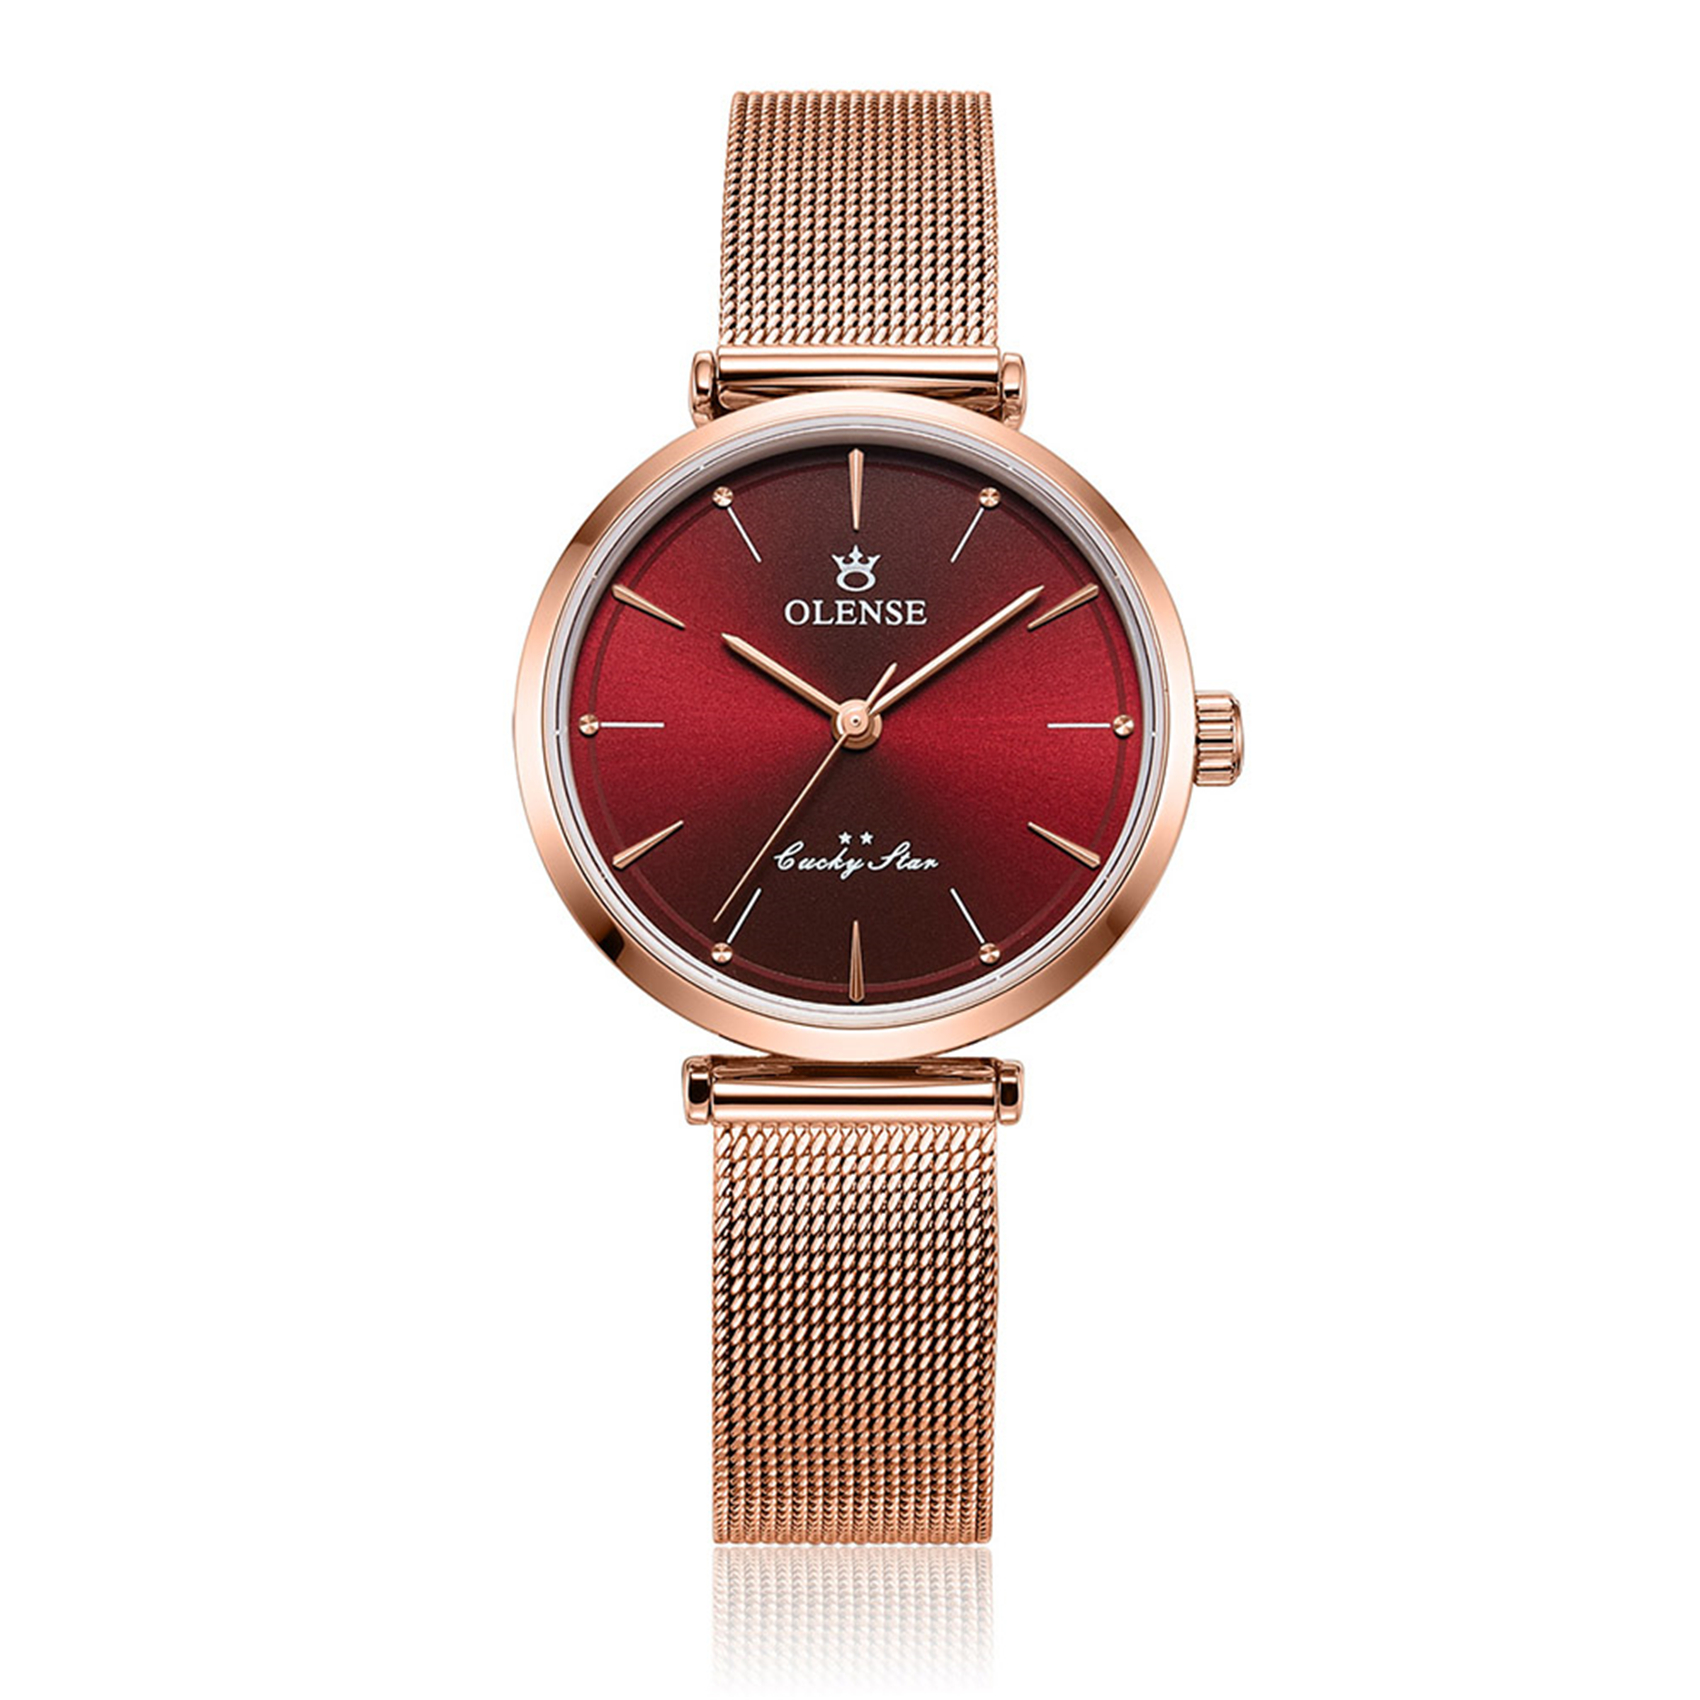 OLENSE - Ladies Classic Watch, Stainless Steel, 29mm, Rose Gold & Red